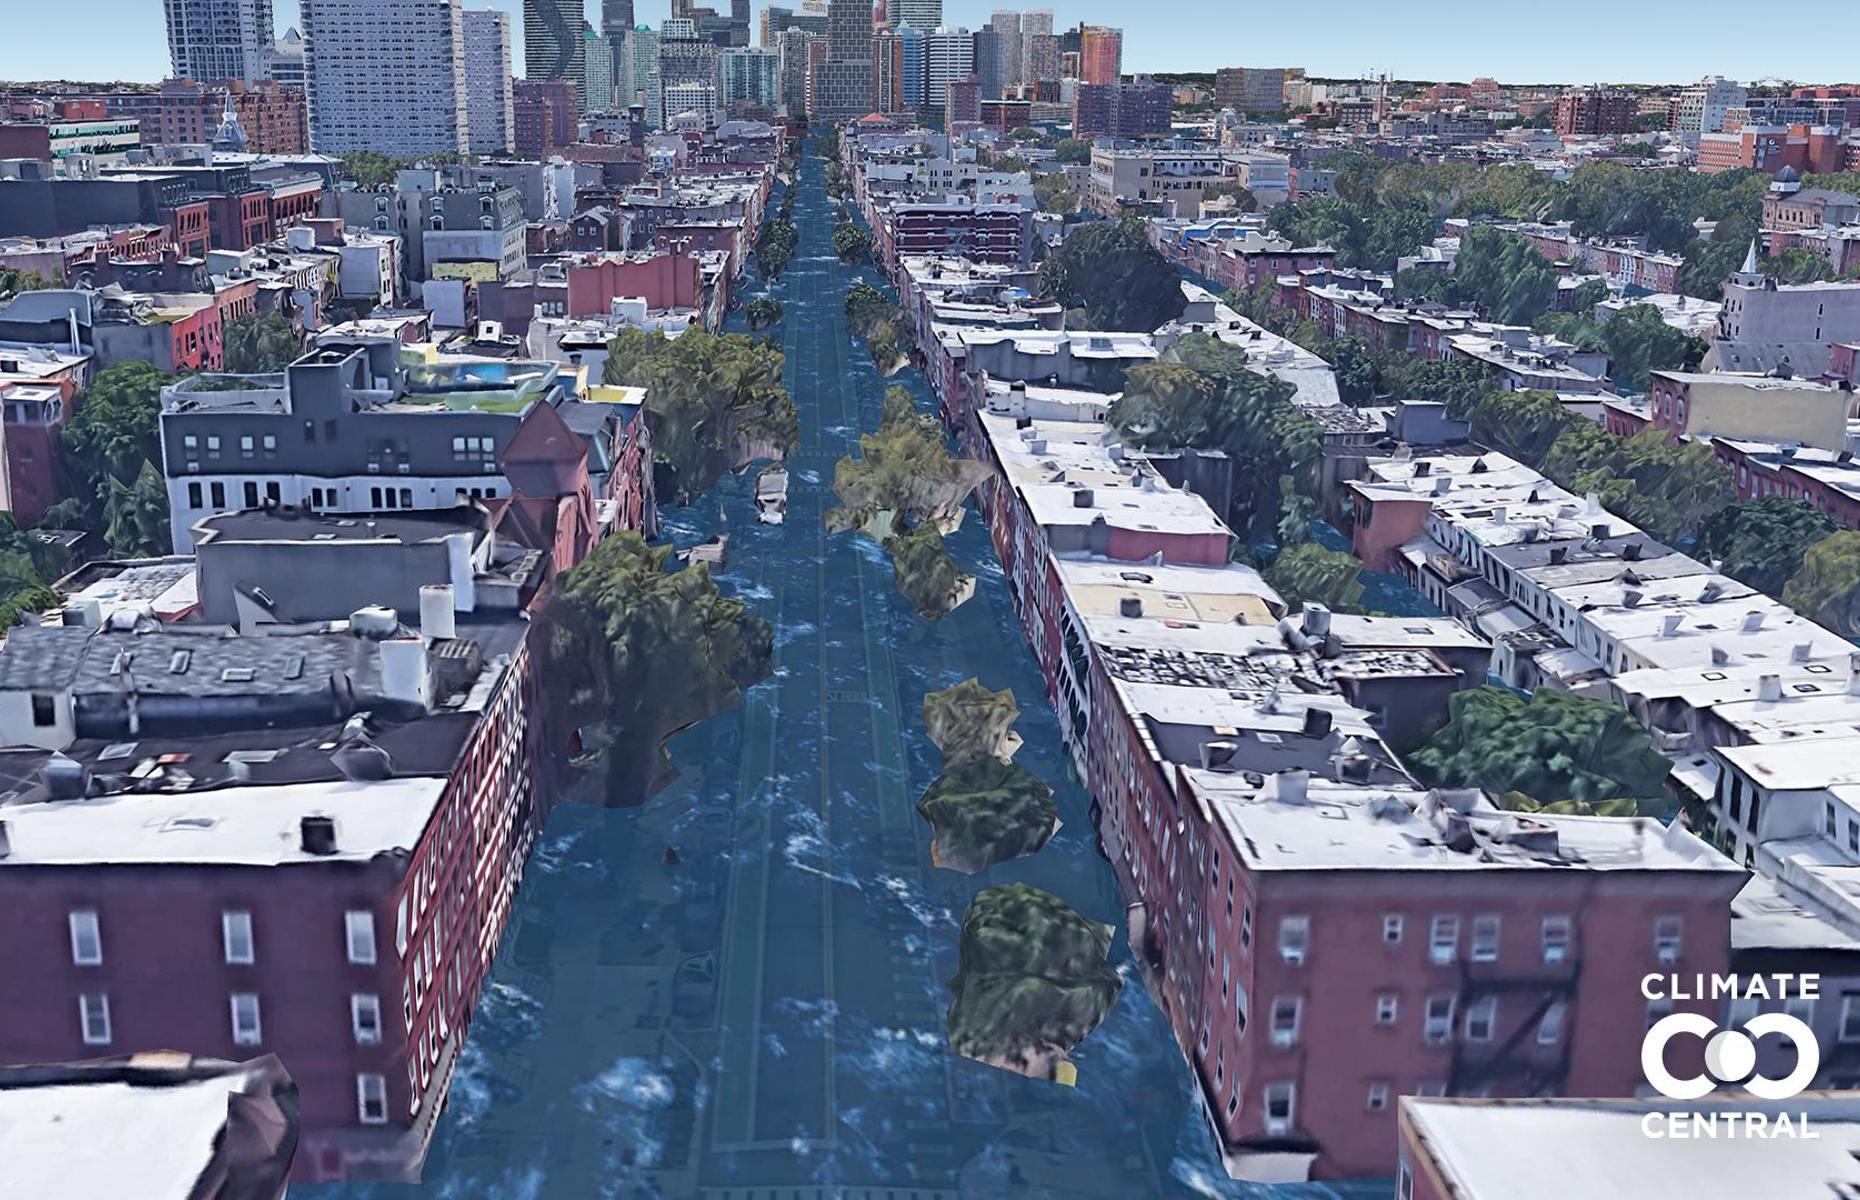 <p>Sitting on the banks of the Hudson River, Hoboken, New Jersey will suffer severely when sea levels rise, as you can see from this image of a drowned-out Washington Street. In fact, even if climate change is curbed at 1.5°C (2.7°F), mapping tools suggest large areas of the New Jersey coastline will be underwater.</p>  <p><strong><a href="https://www.loveexploring.com/galleries/91927/incredible-places-that-will-be-underwater-by-2050">Read about these incredible places that will be underwater by 2050</a></strong></p>